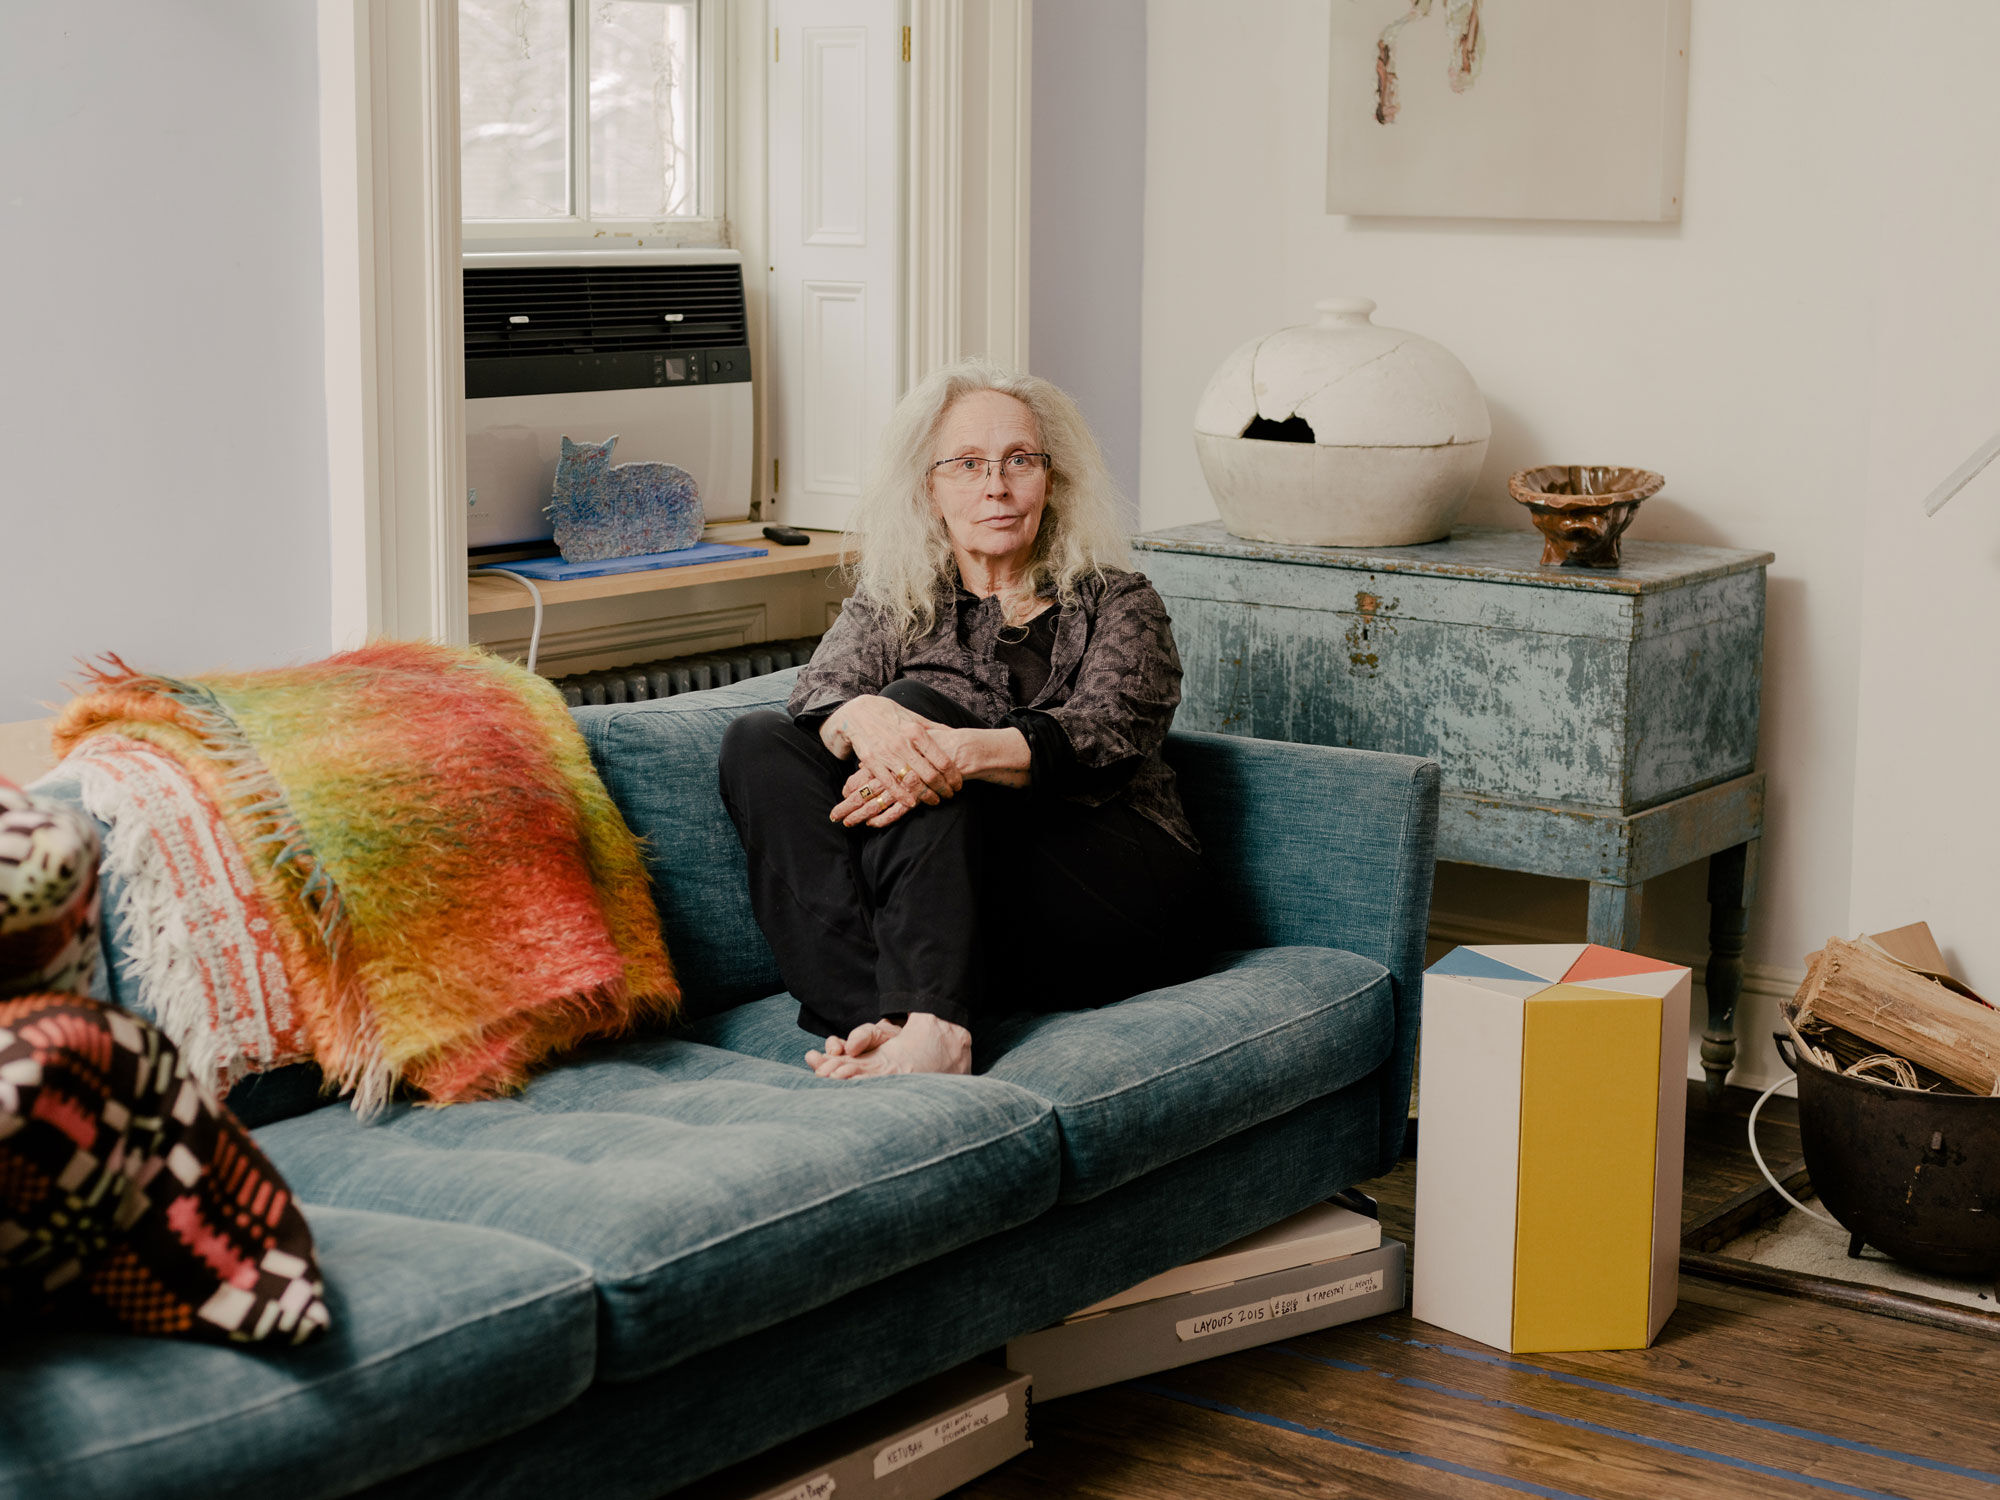 Portrait of Kiki Smith in her New York home and studio. Below the couch, archival boxes store rubbings and templates from past work. Portrait by Daniel Dorsa for Artsy. 